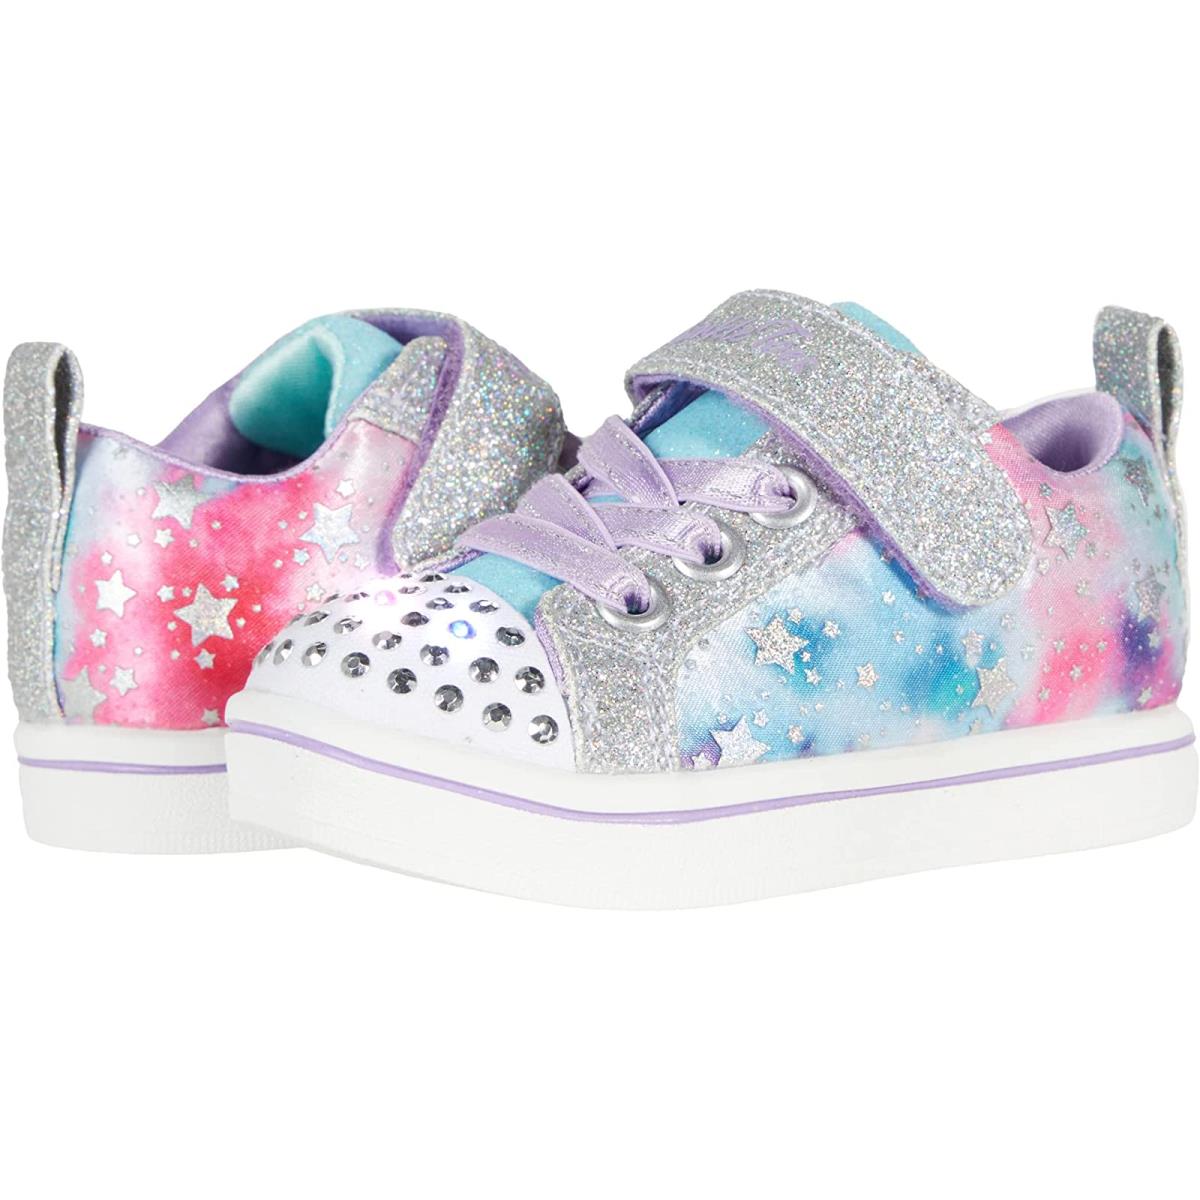 Girl`s Shoes Skechers Kids Twinkle Toes - Sparkle Rayz 314836N Toddler Silver/Multi